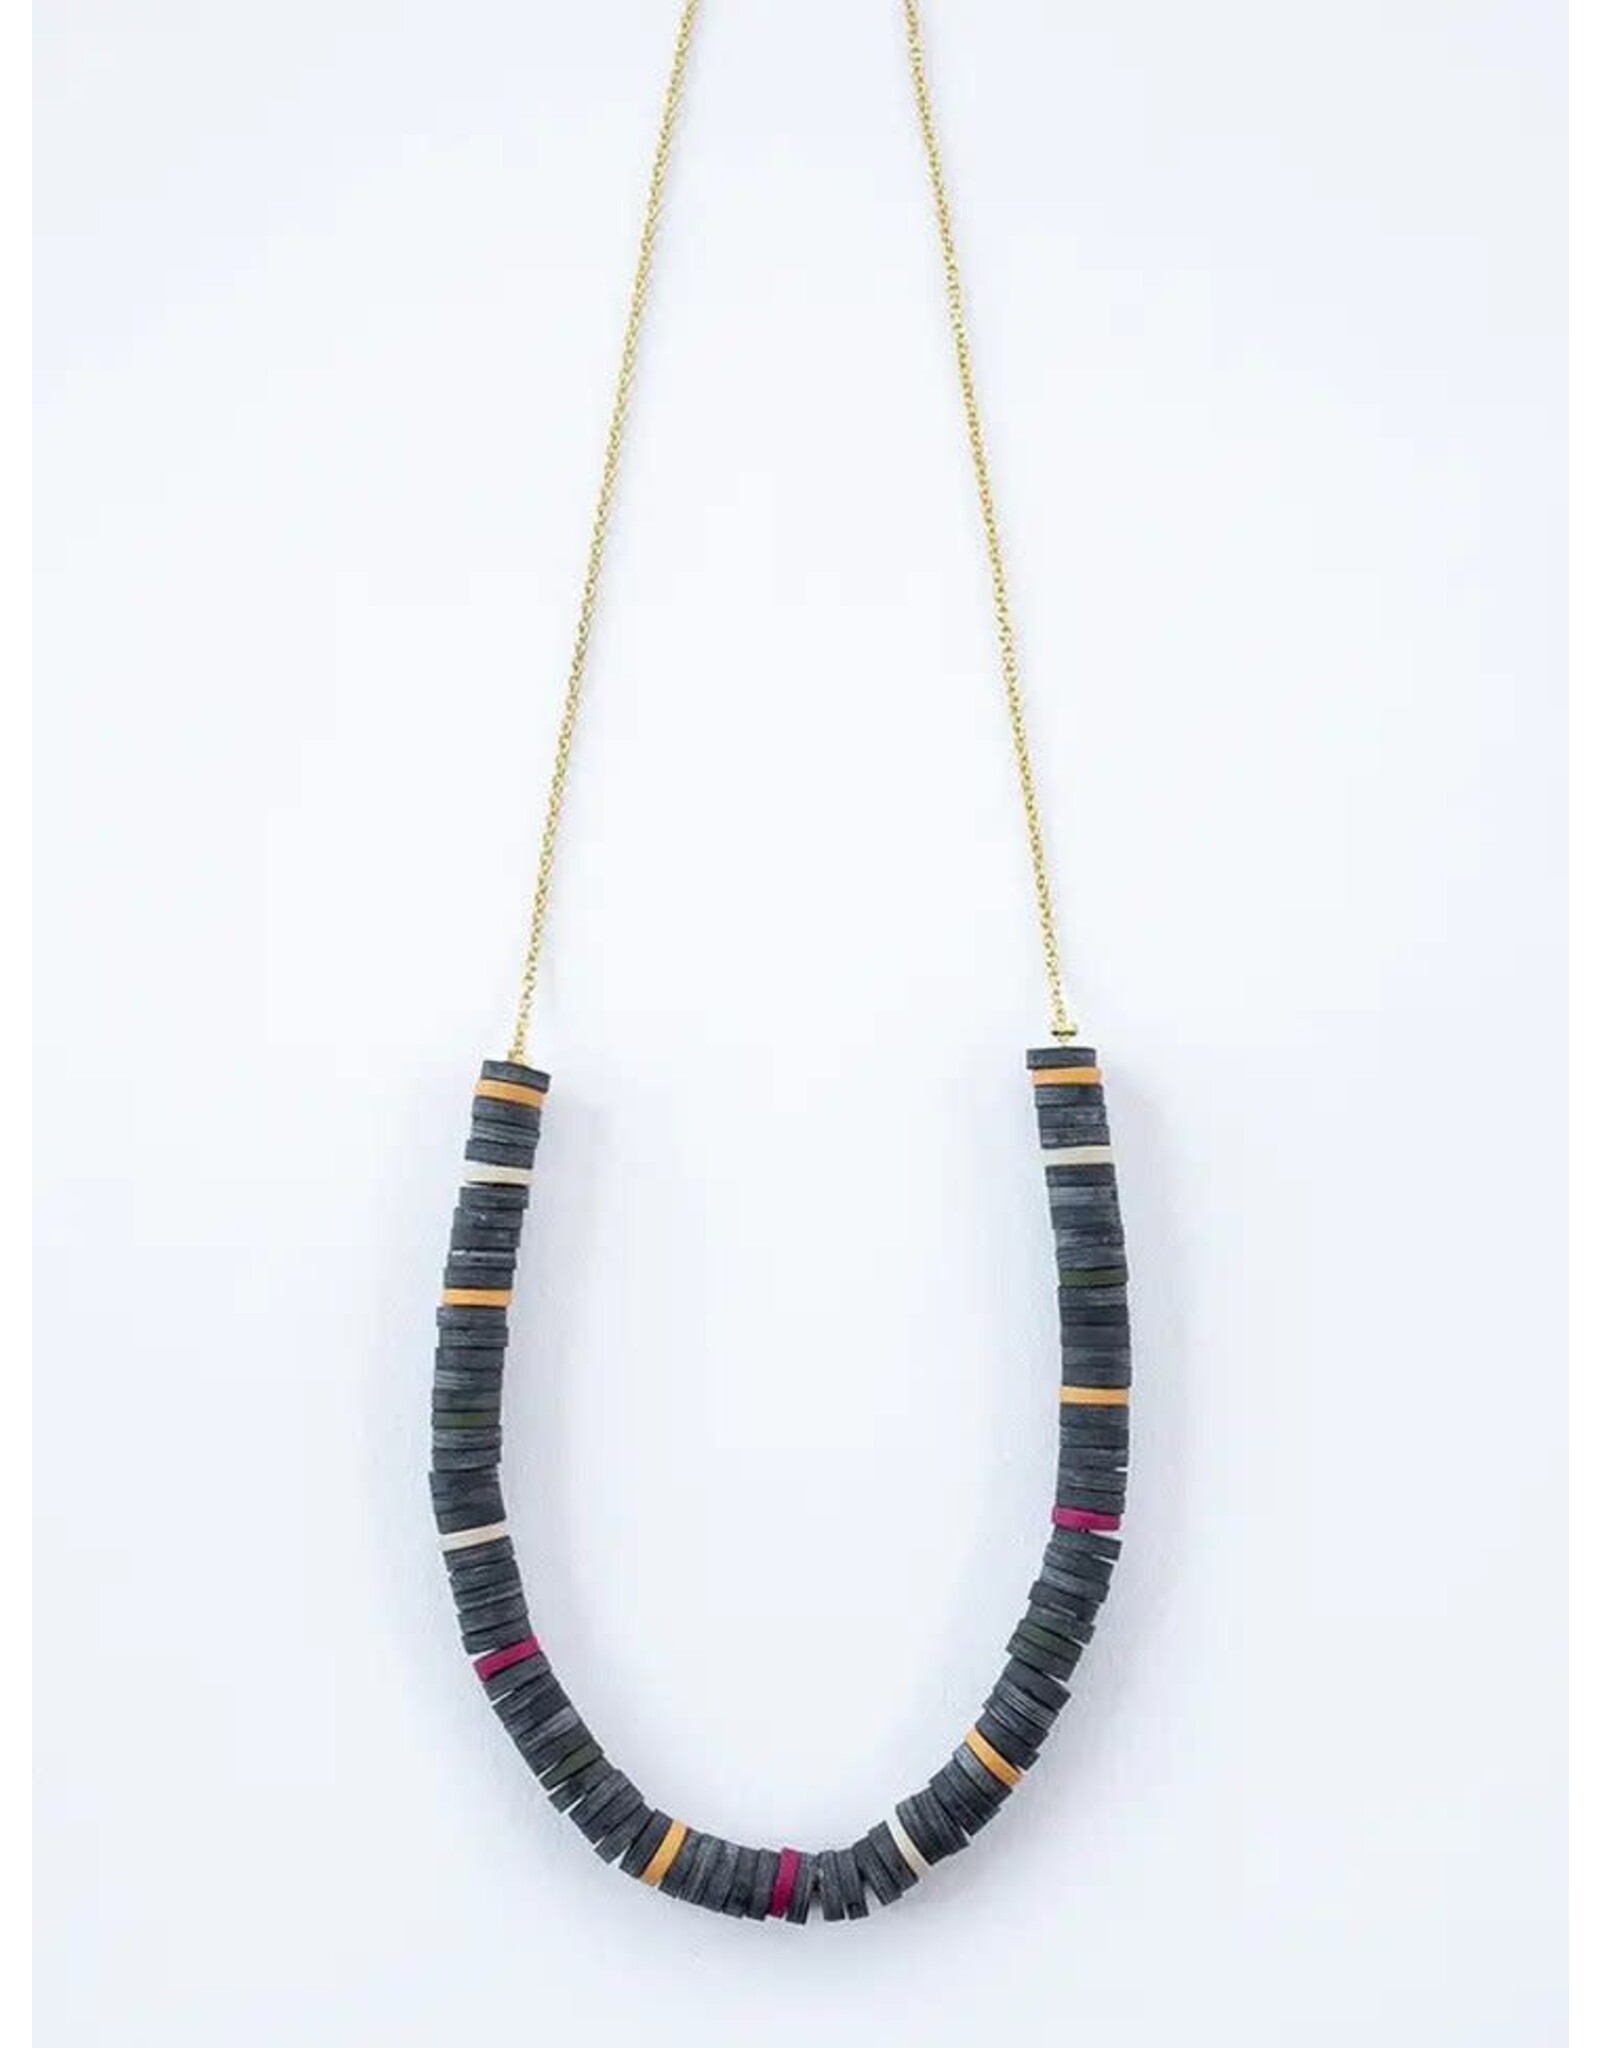 Trade roots Heishi Necklace, India